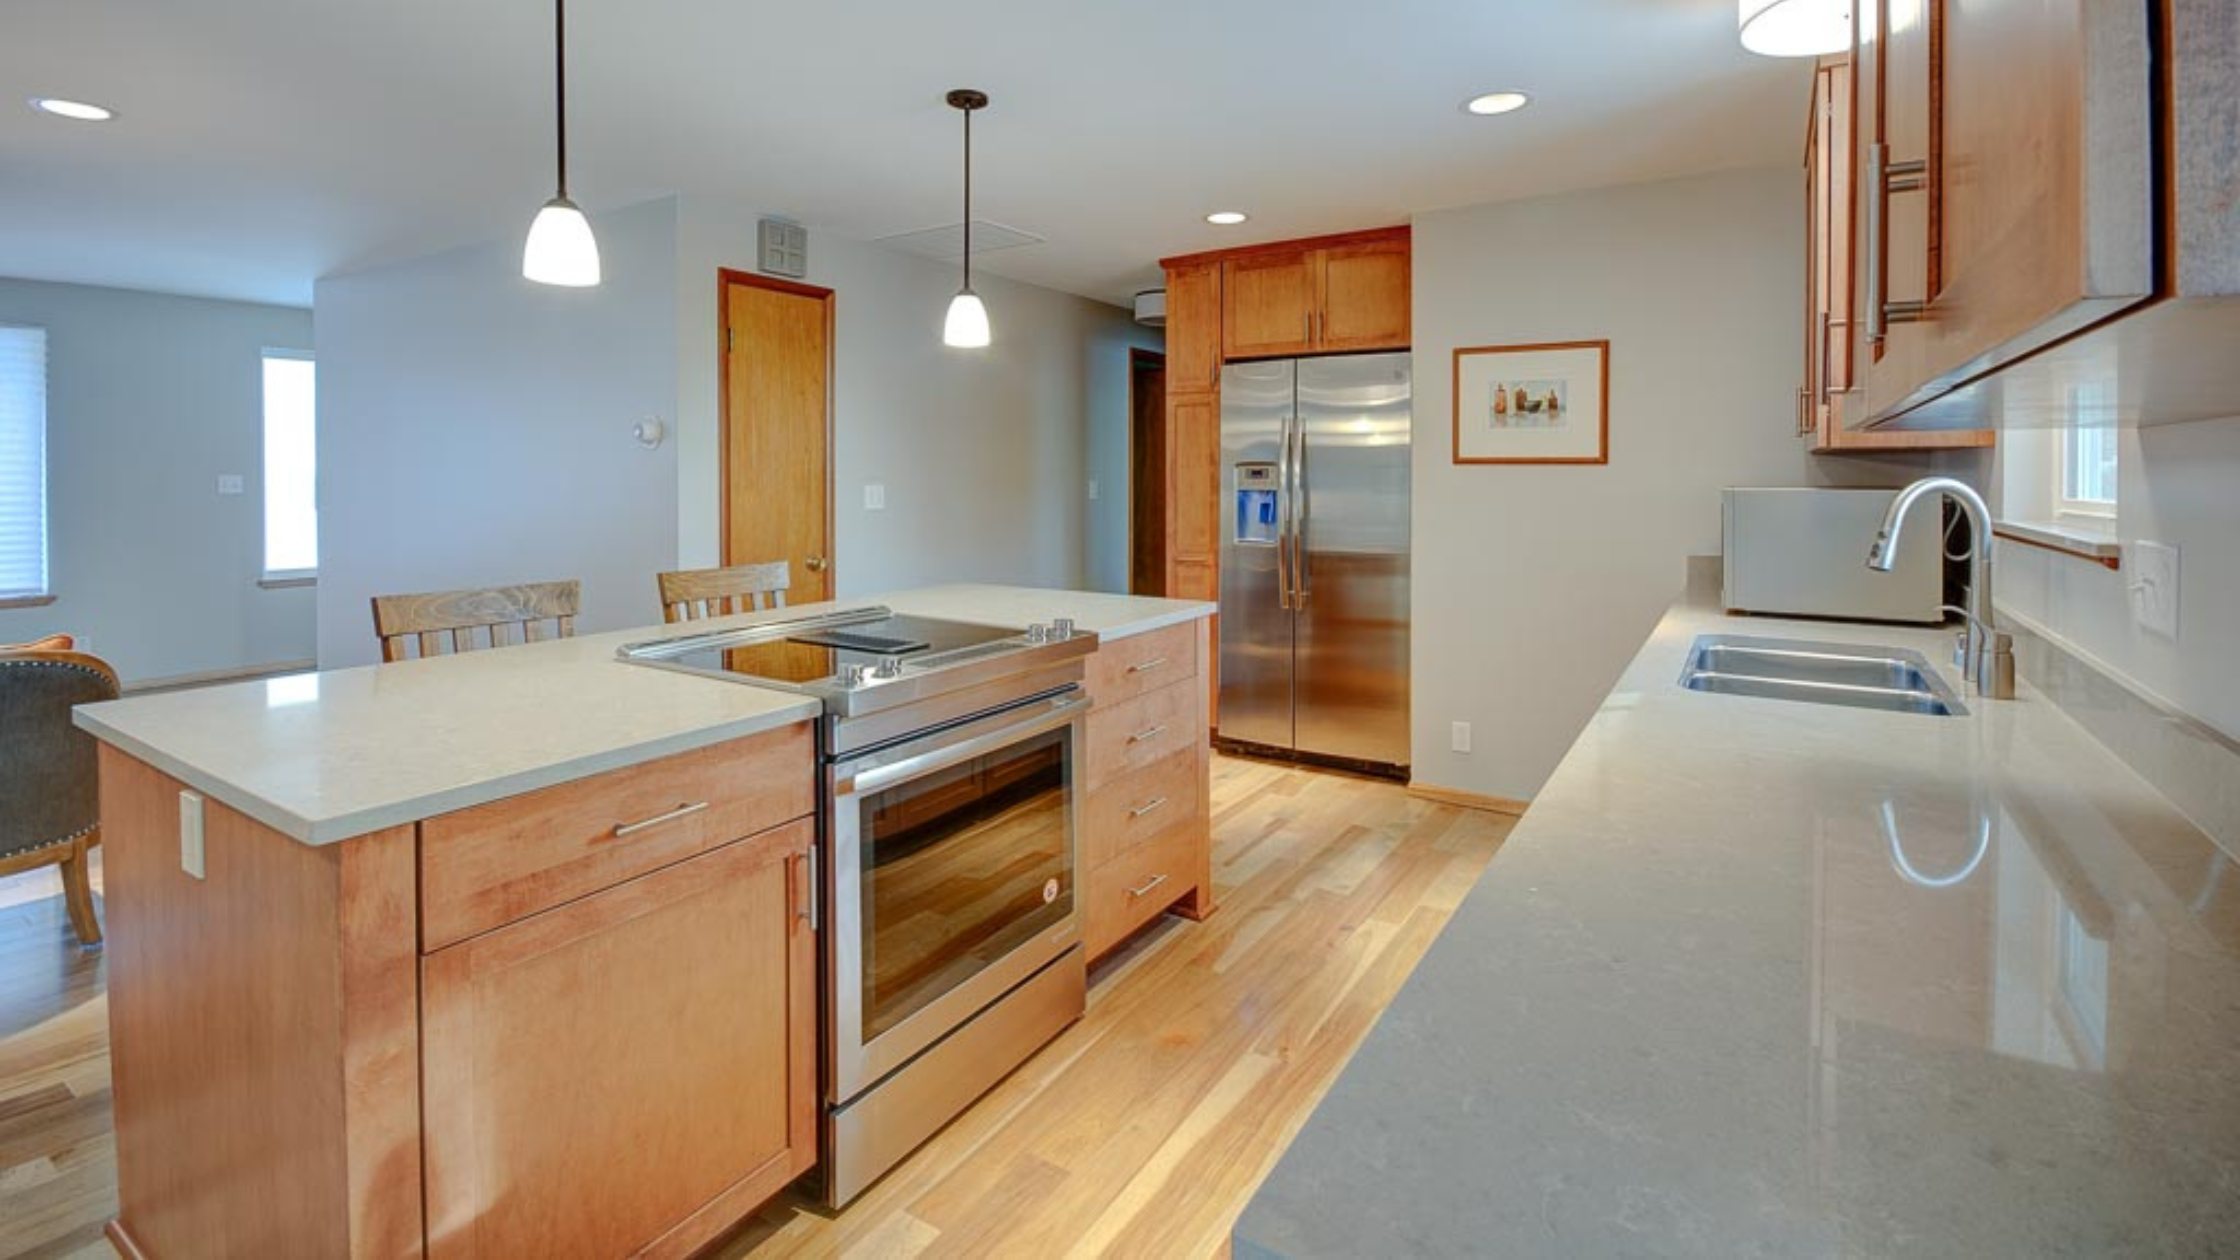 How Much Space is Needed for a Kitchen Island? Top Things to Know About Space Requirements